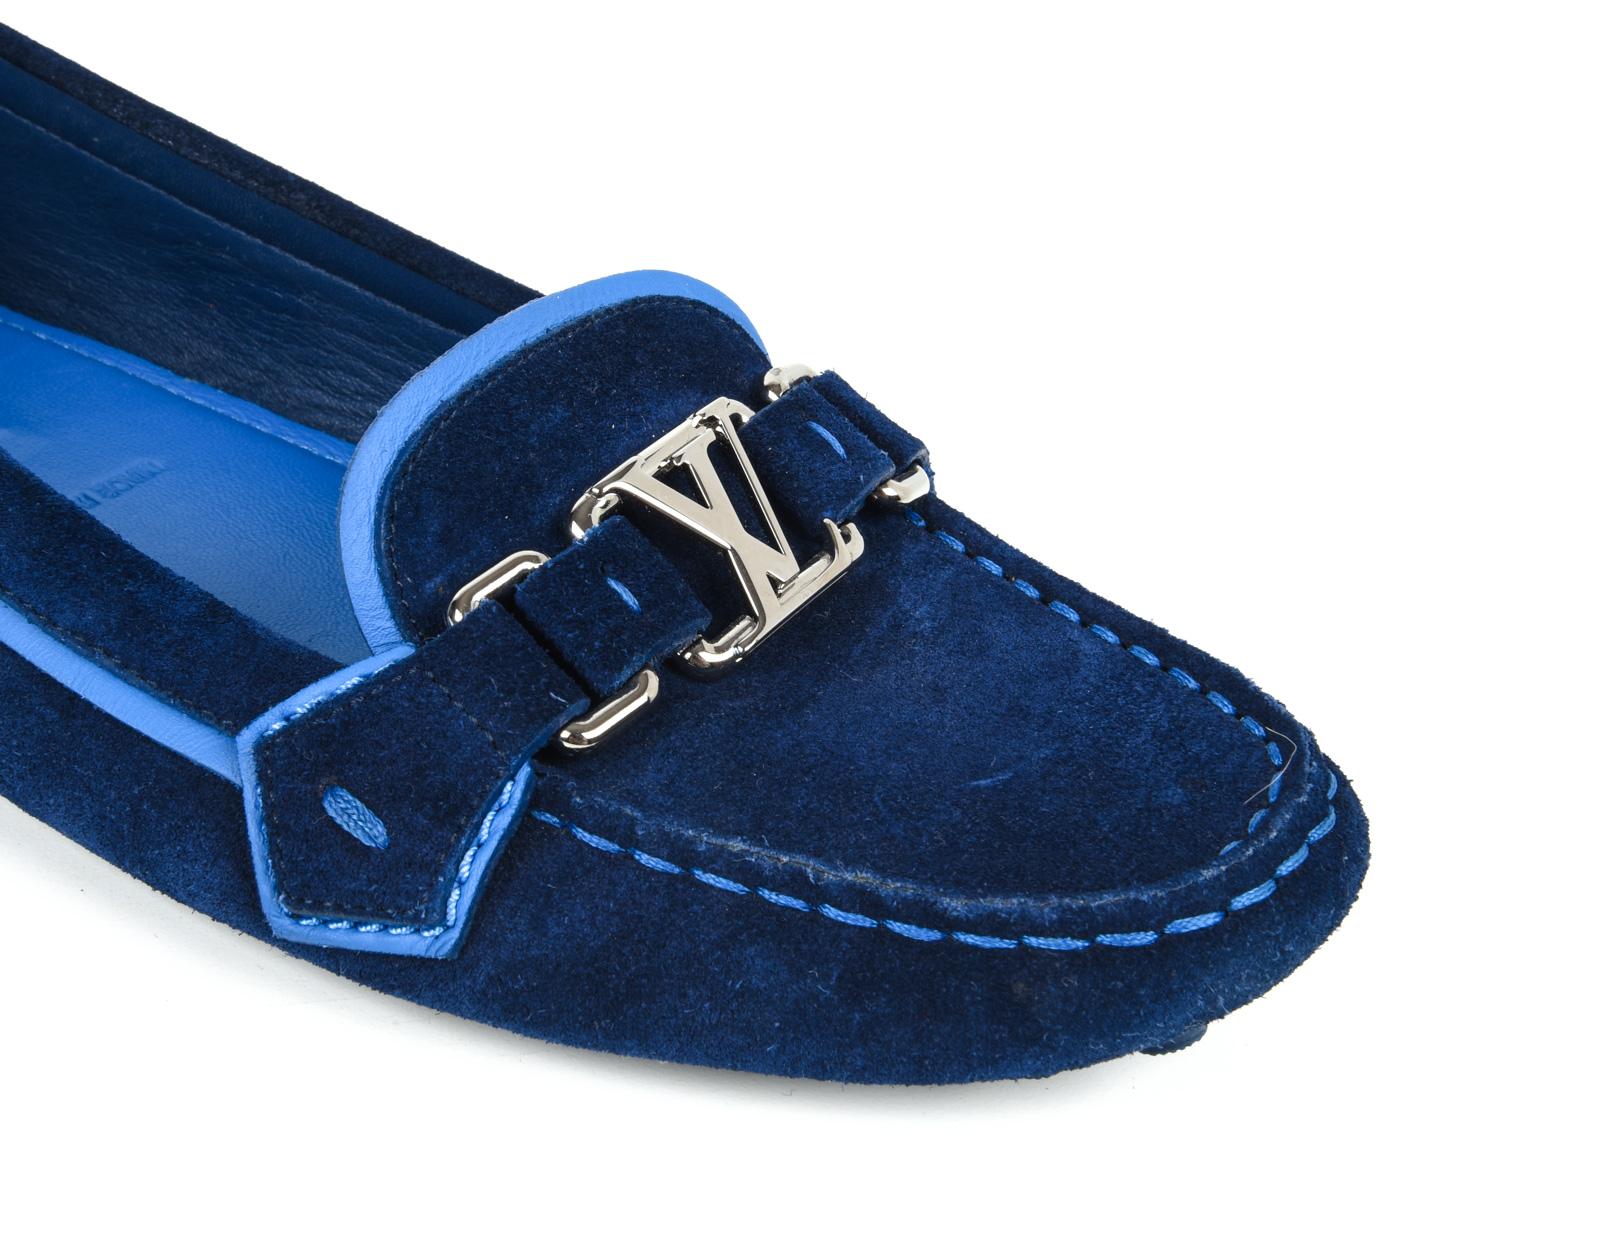 Guaranteed authentic Louis Vuitton rich royal blue navy suede loafer / driving shoe.  
Silver signature LV logo across shoe.
Accentuated with lighter blue leather trim and stitching.
NEW or NEVER WORN 

SIZE 38.5 
USA SIZE 8.5

SHOE MEASURES:
HEEL 